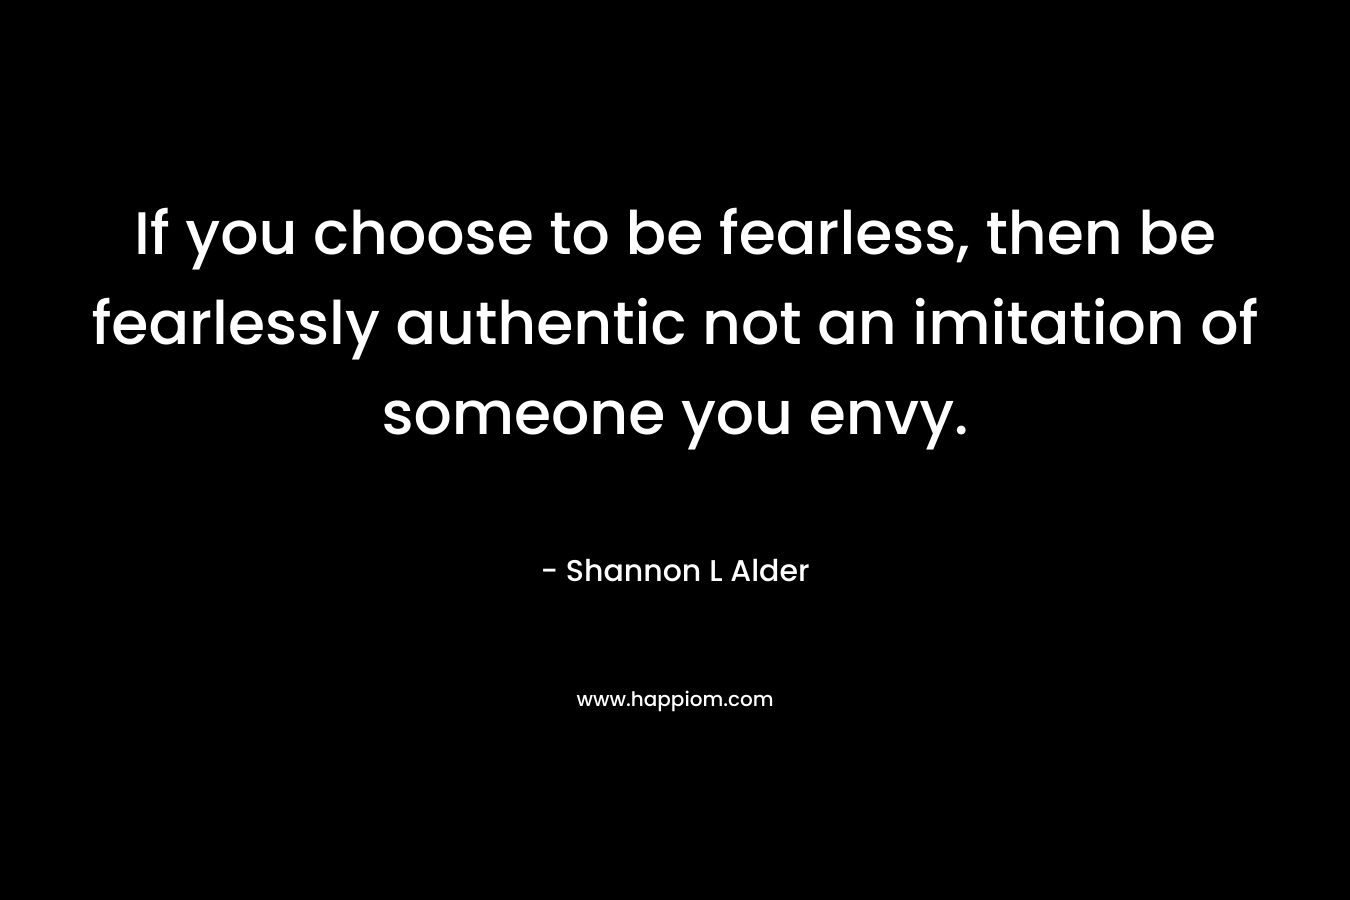 If you choose to be fearless, then be fearlessly authentic not an imitation of someone you envy. – Shannon L Alder